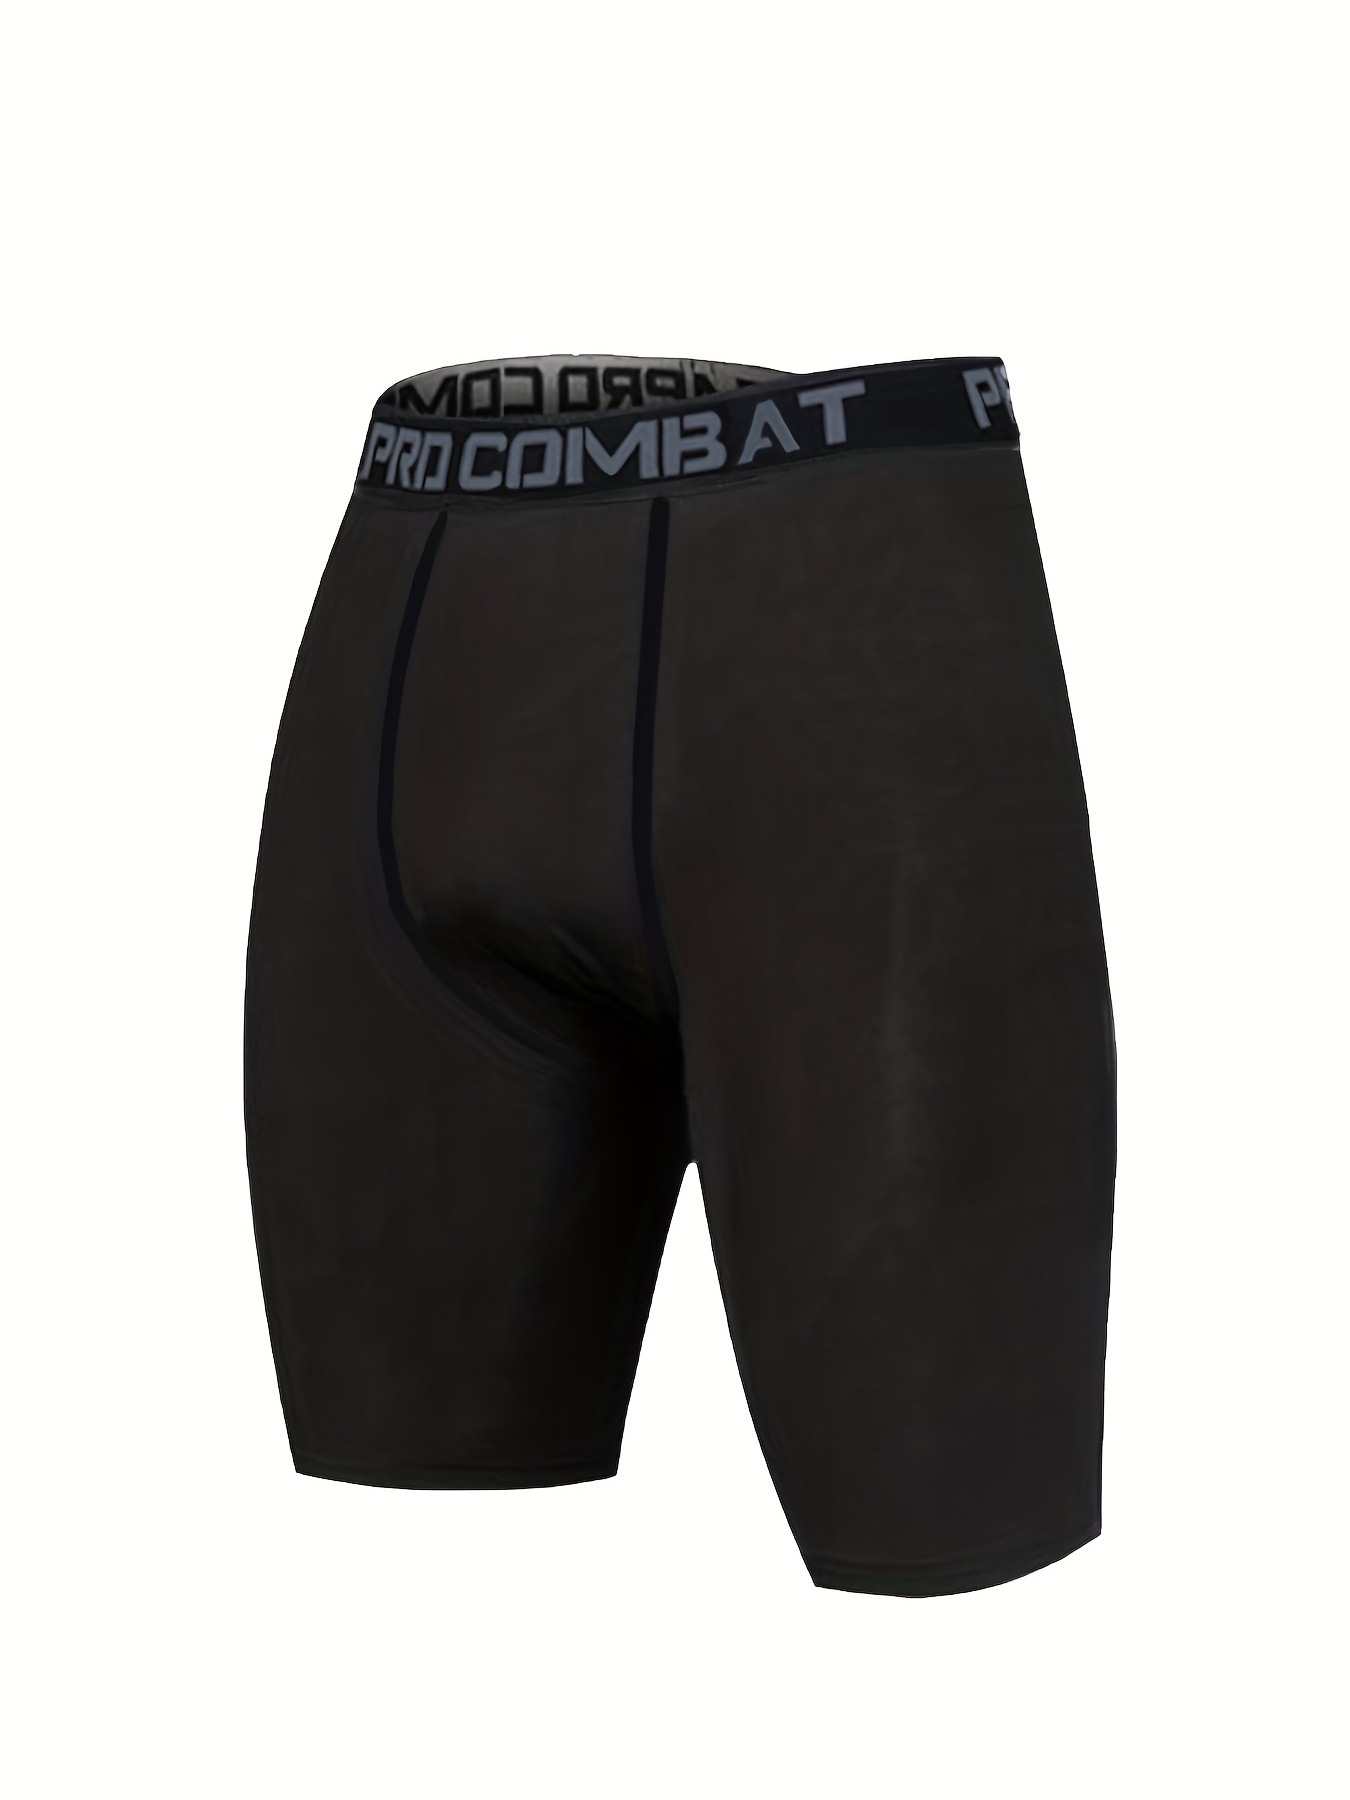 Mens Under Armour Heatgear Sonic Compression Short with Cup Boxer